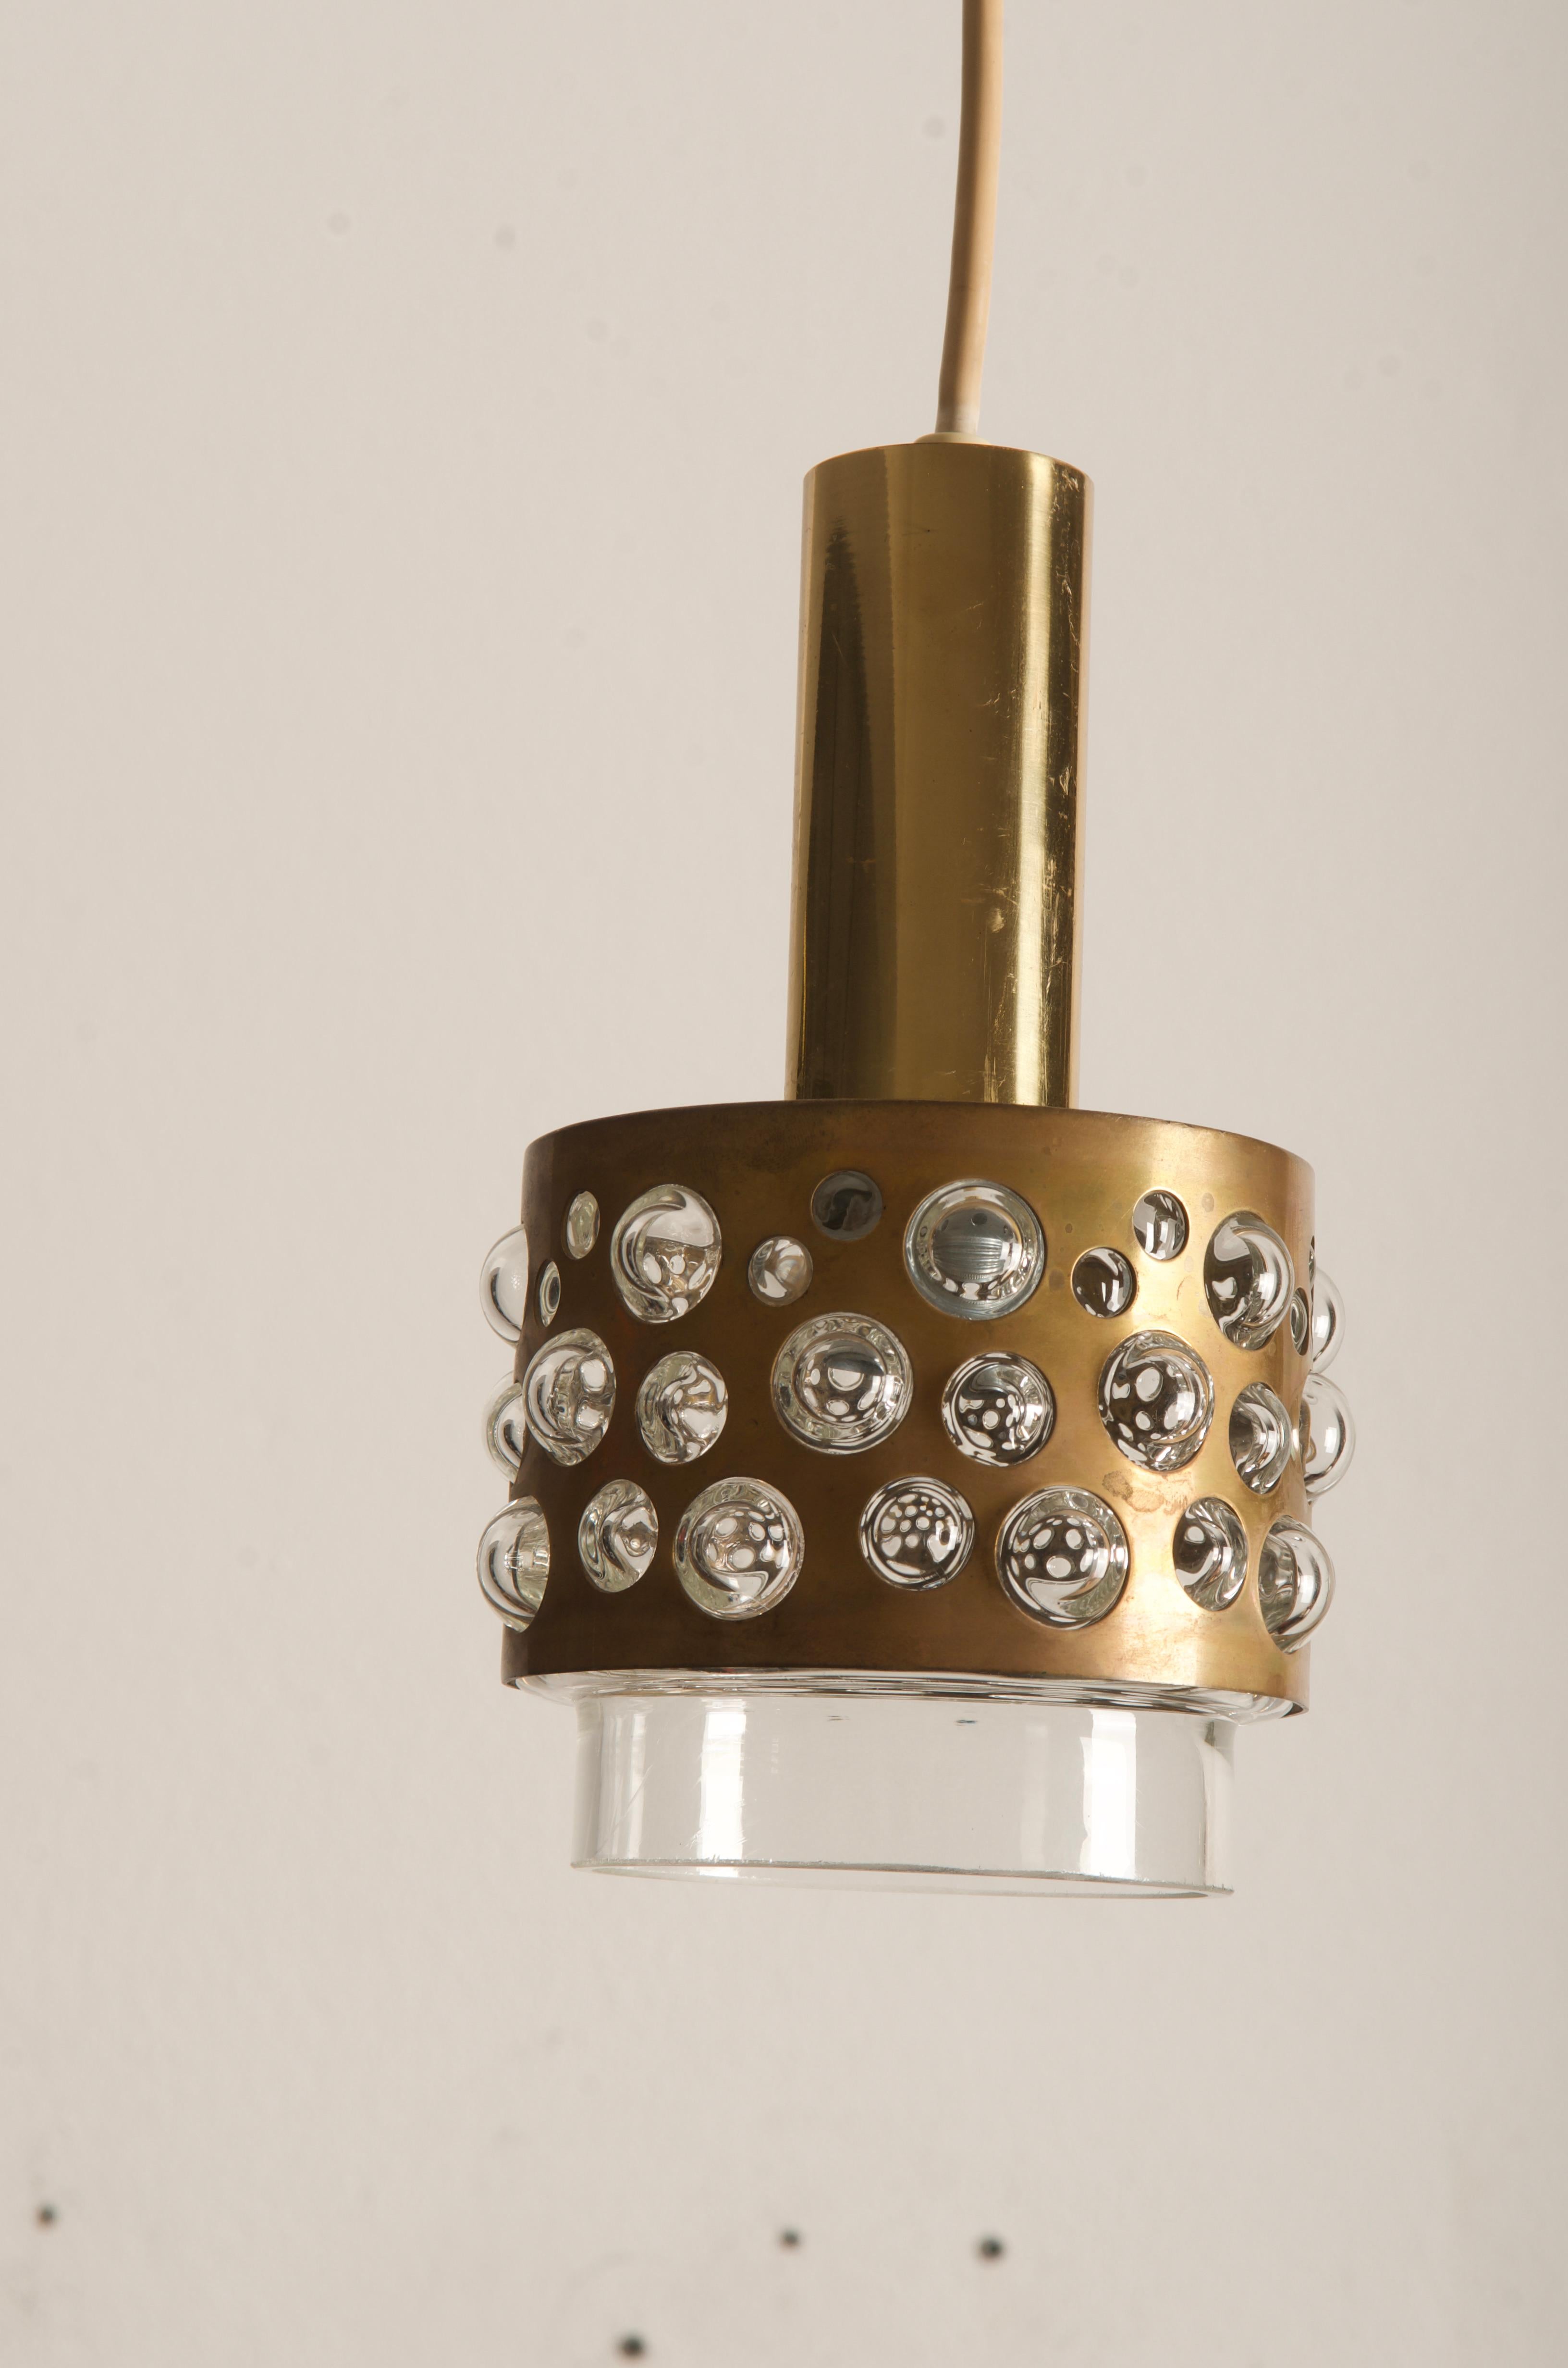 Brass construction with glass, fitted with E27 sockets. Made in Austria, Vienna in the 1960s by Rupert Nikoll.